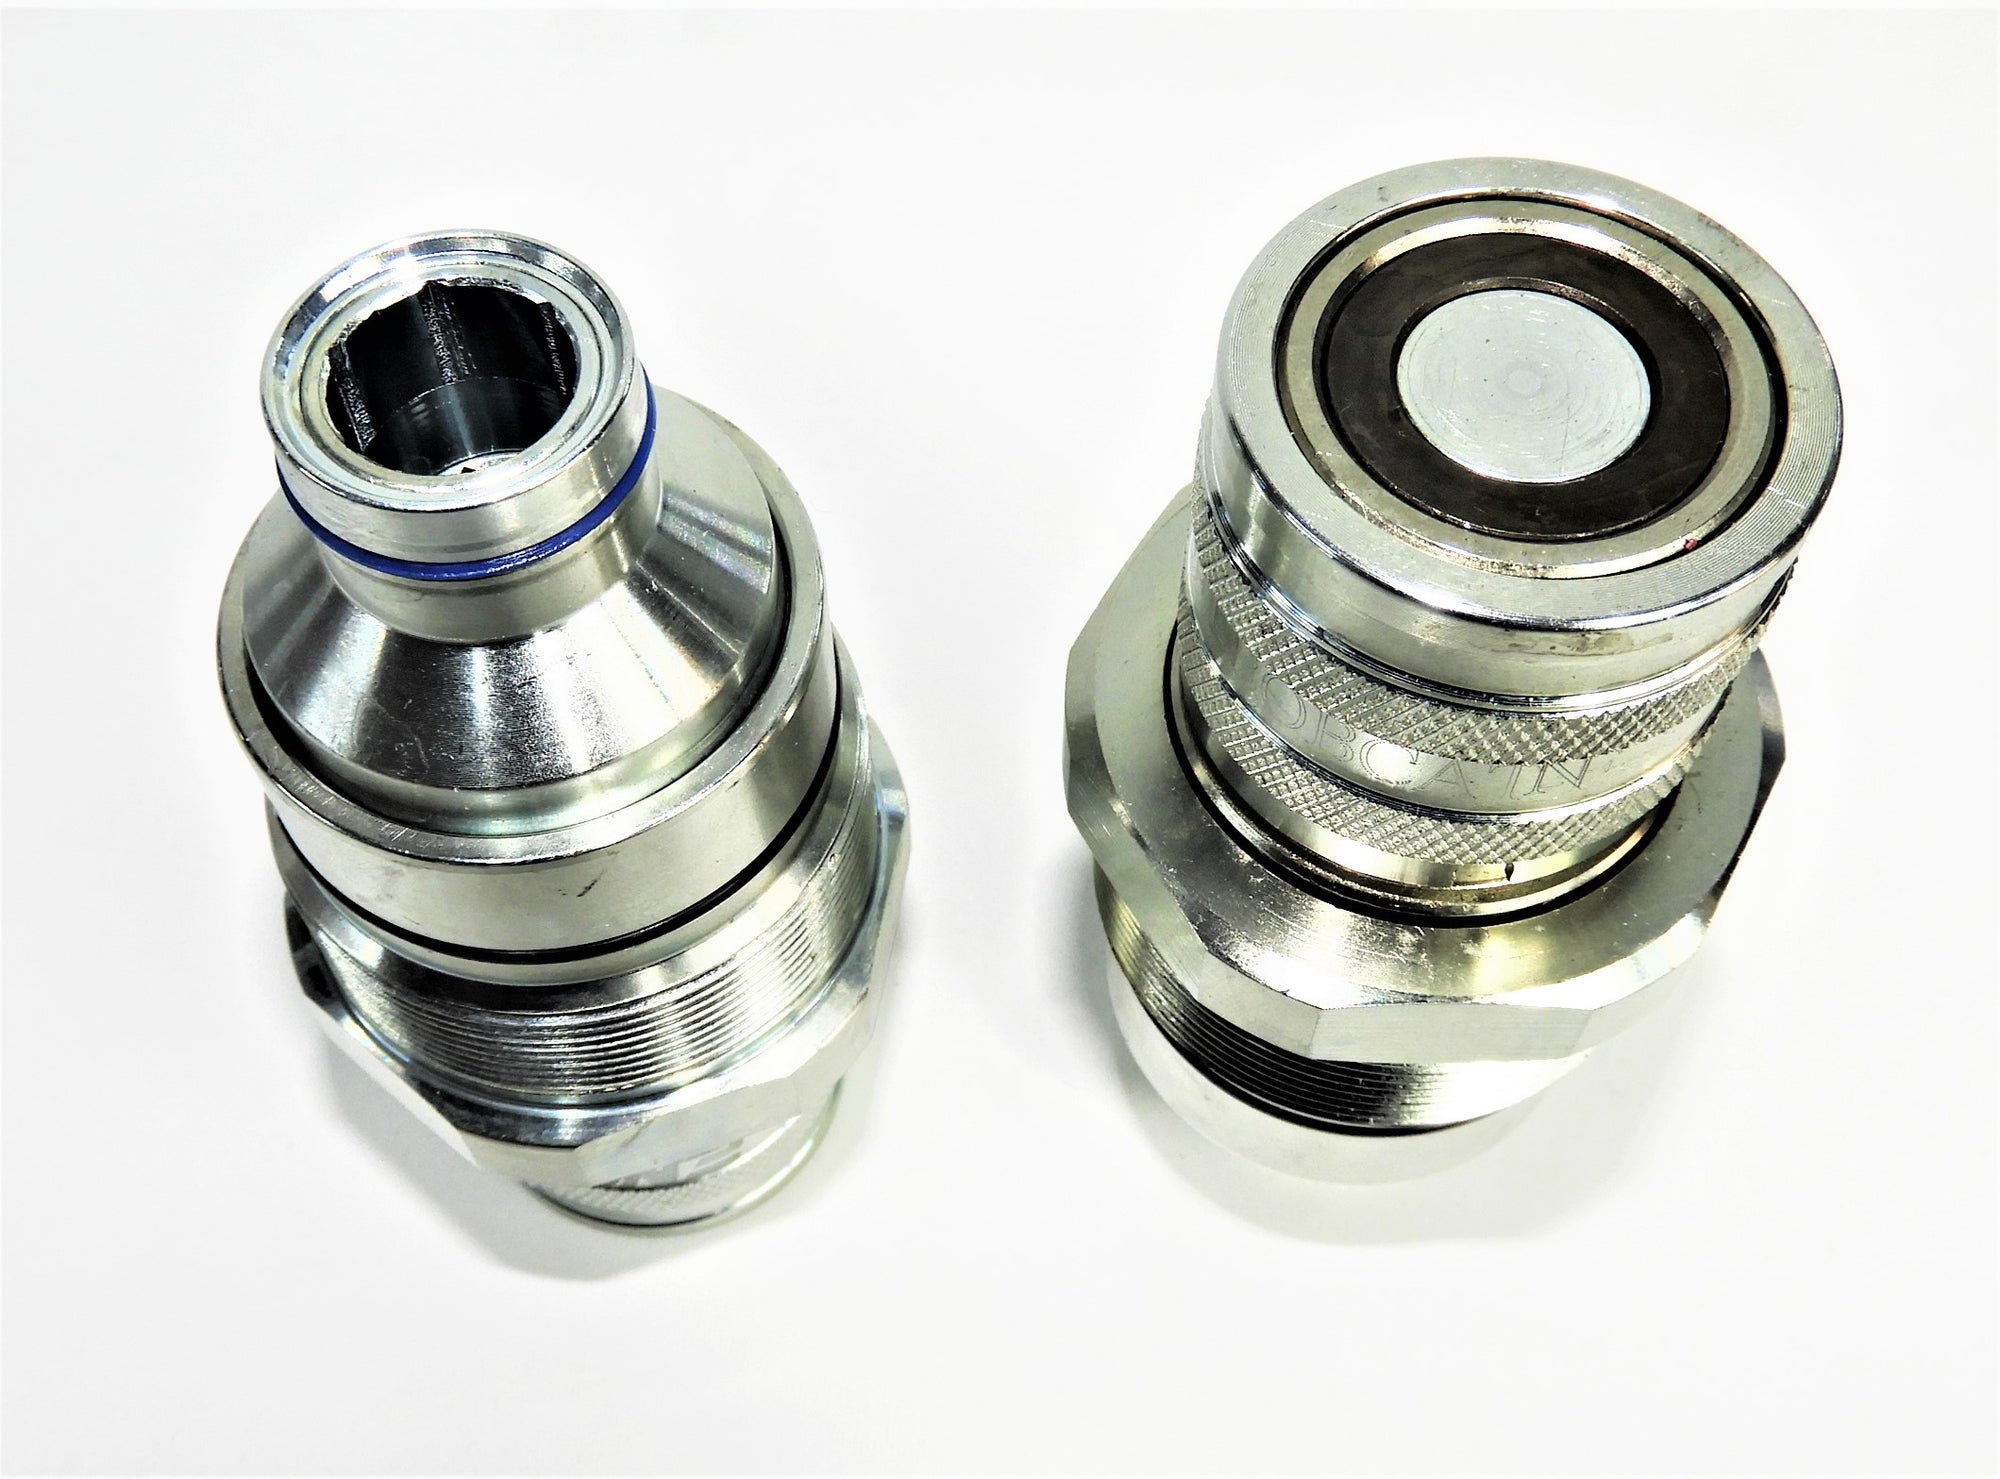 Internal and External View of New Style Female Manifold Coupler for Bobcat Part Number 7246802